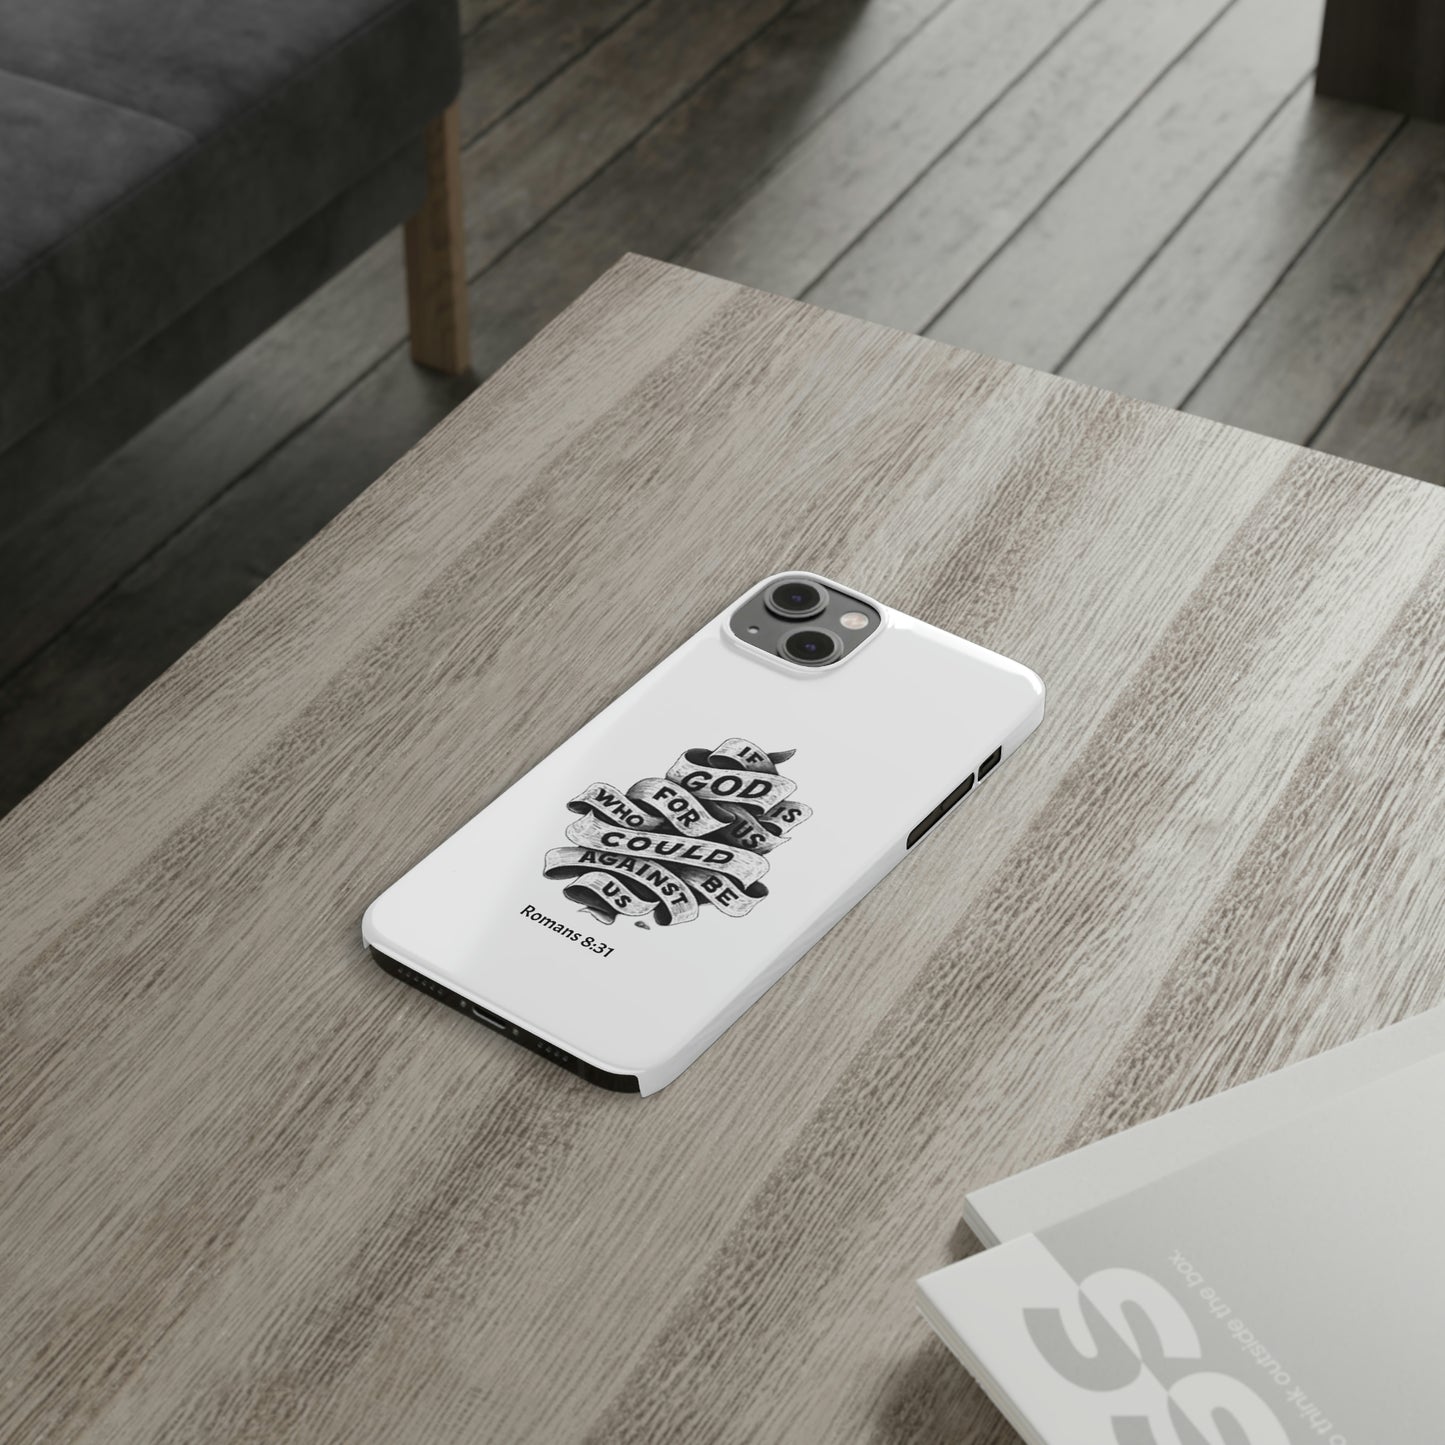 If God Is For Us iPhone Slim Phone Case